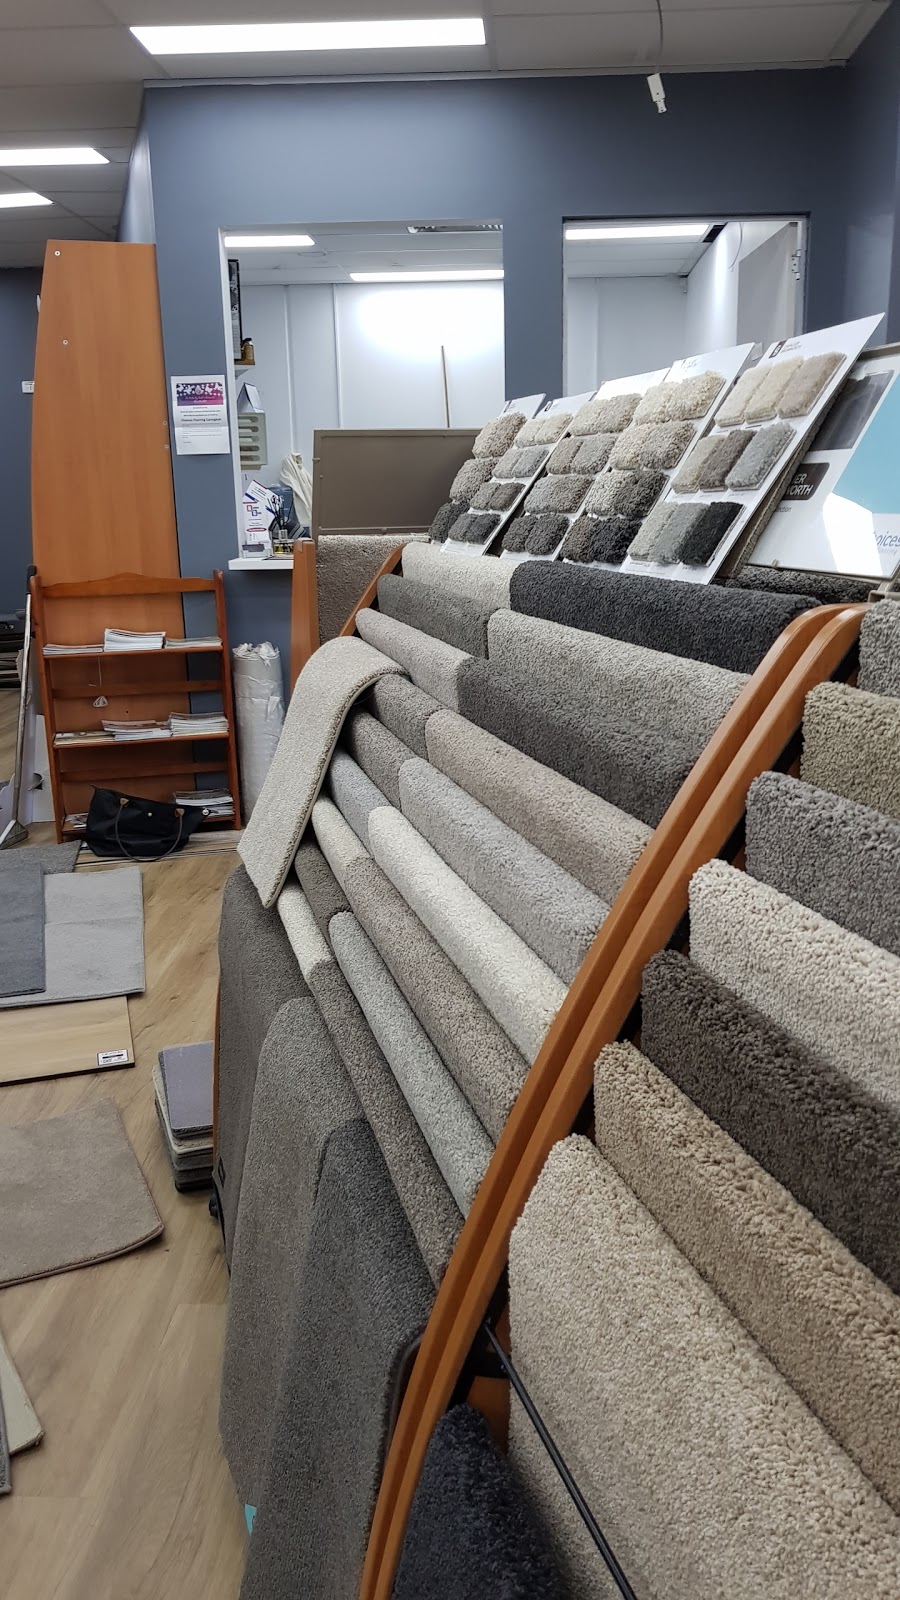 Choices Flooring | home goods store | 1/59-63 Captain Cook Dr, Caringbah NSW 2229, Australia | 0295243755 OR +61 2 9524 3755